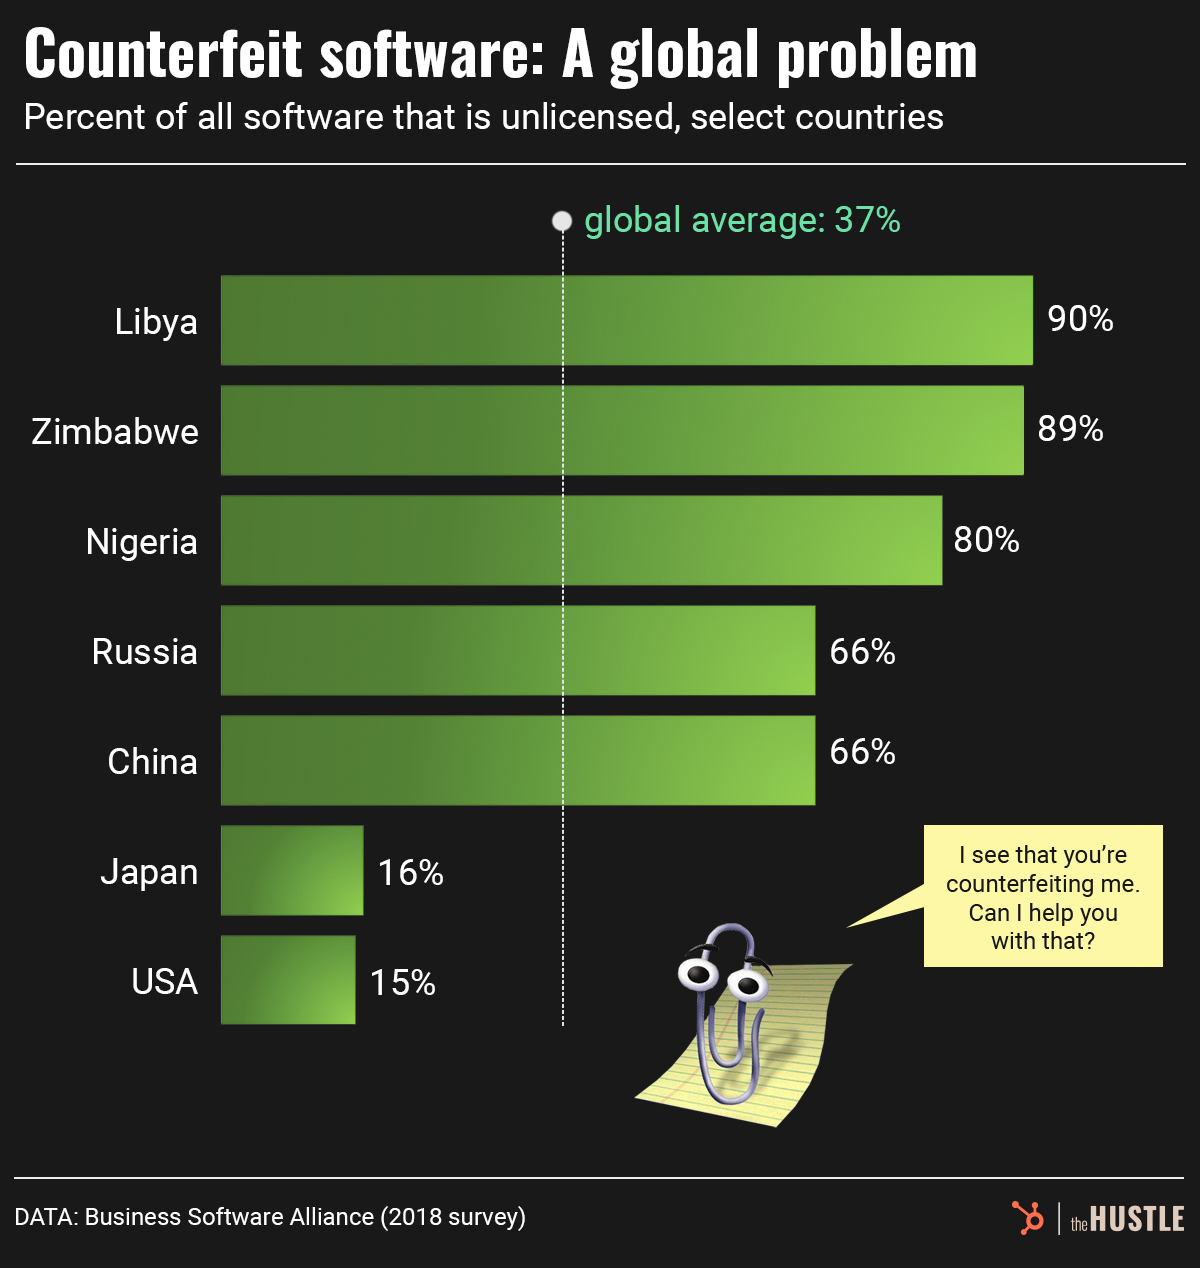 source: The Hustle - https://thehustle.co/why-so-much-of-the-world-runs-on-counterfeit-software/